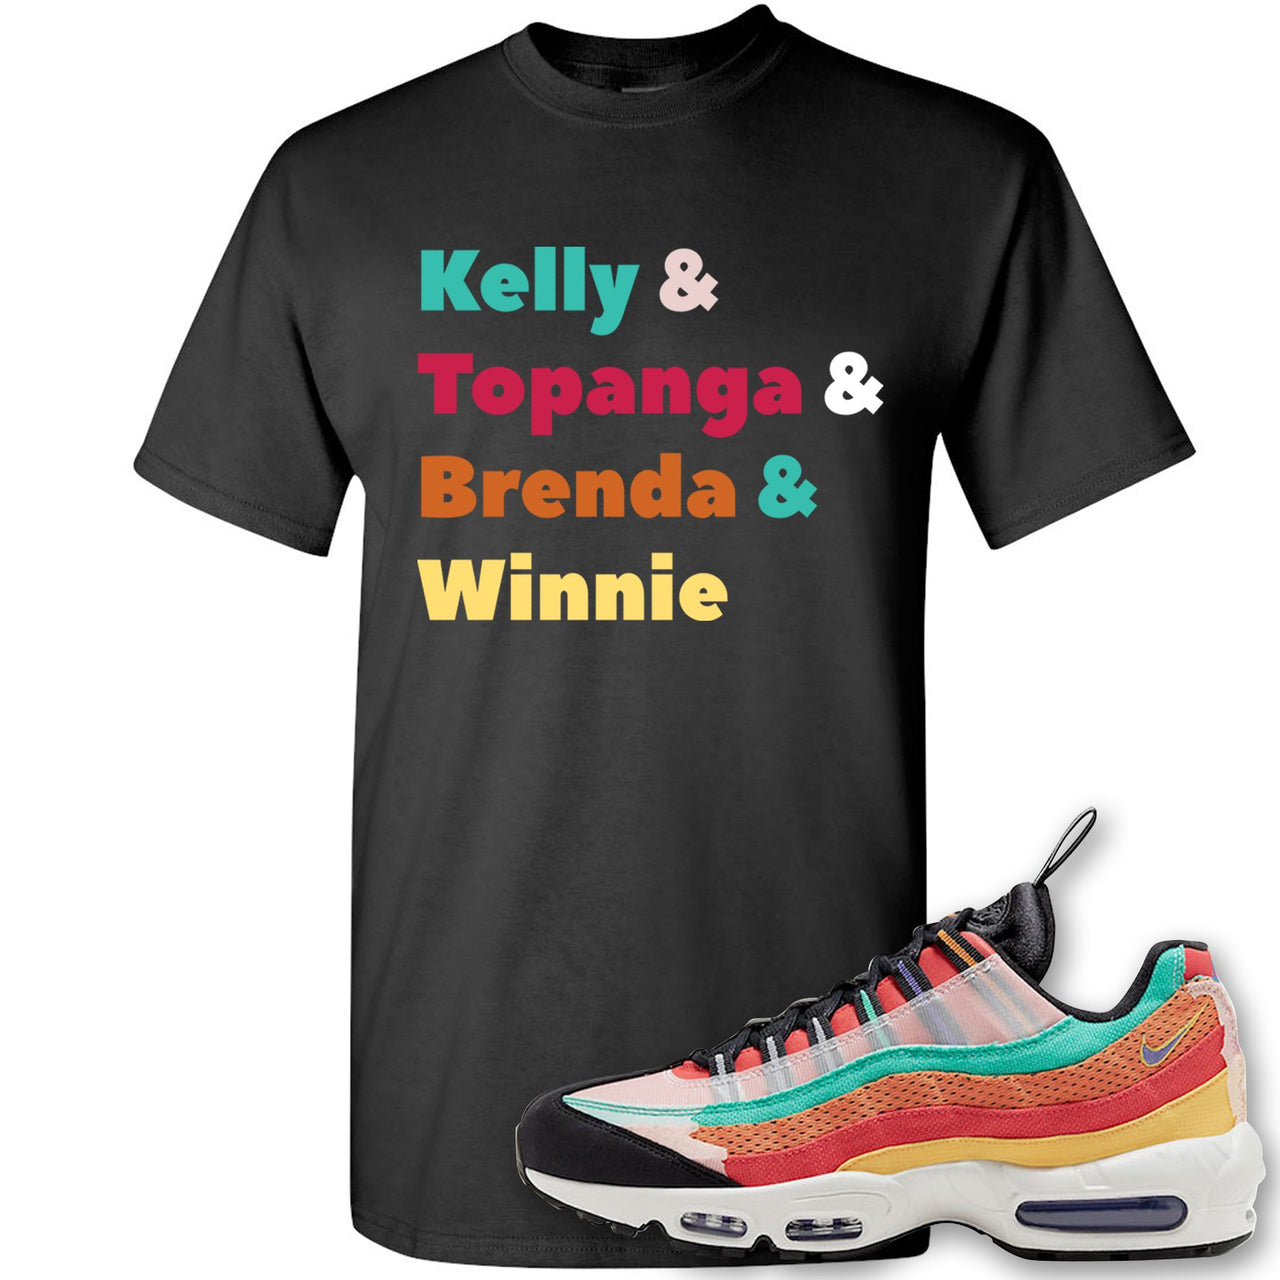 Air Max 95 Black History Month Sneaker Black T Shirt | Tees to match Nike Air Max 95 Black History Month Shoes | Kelly And Gang